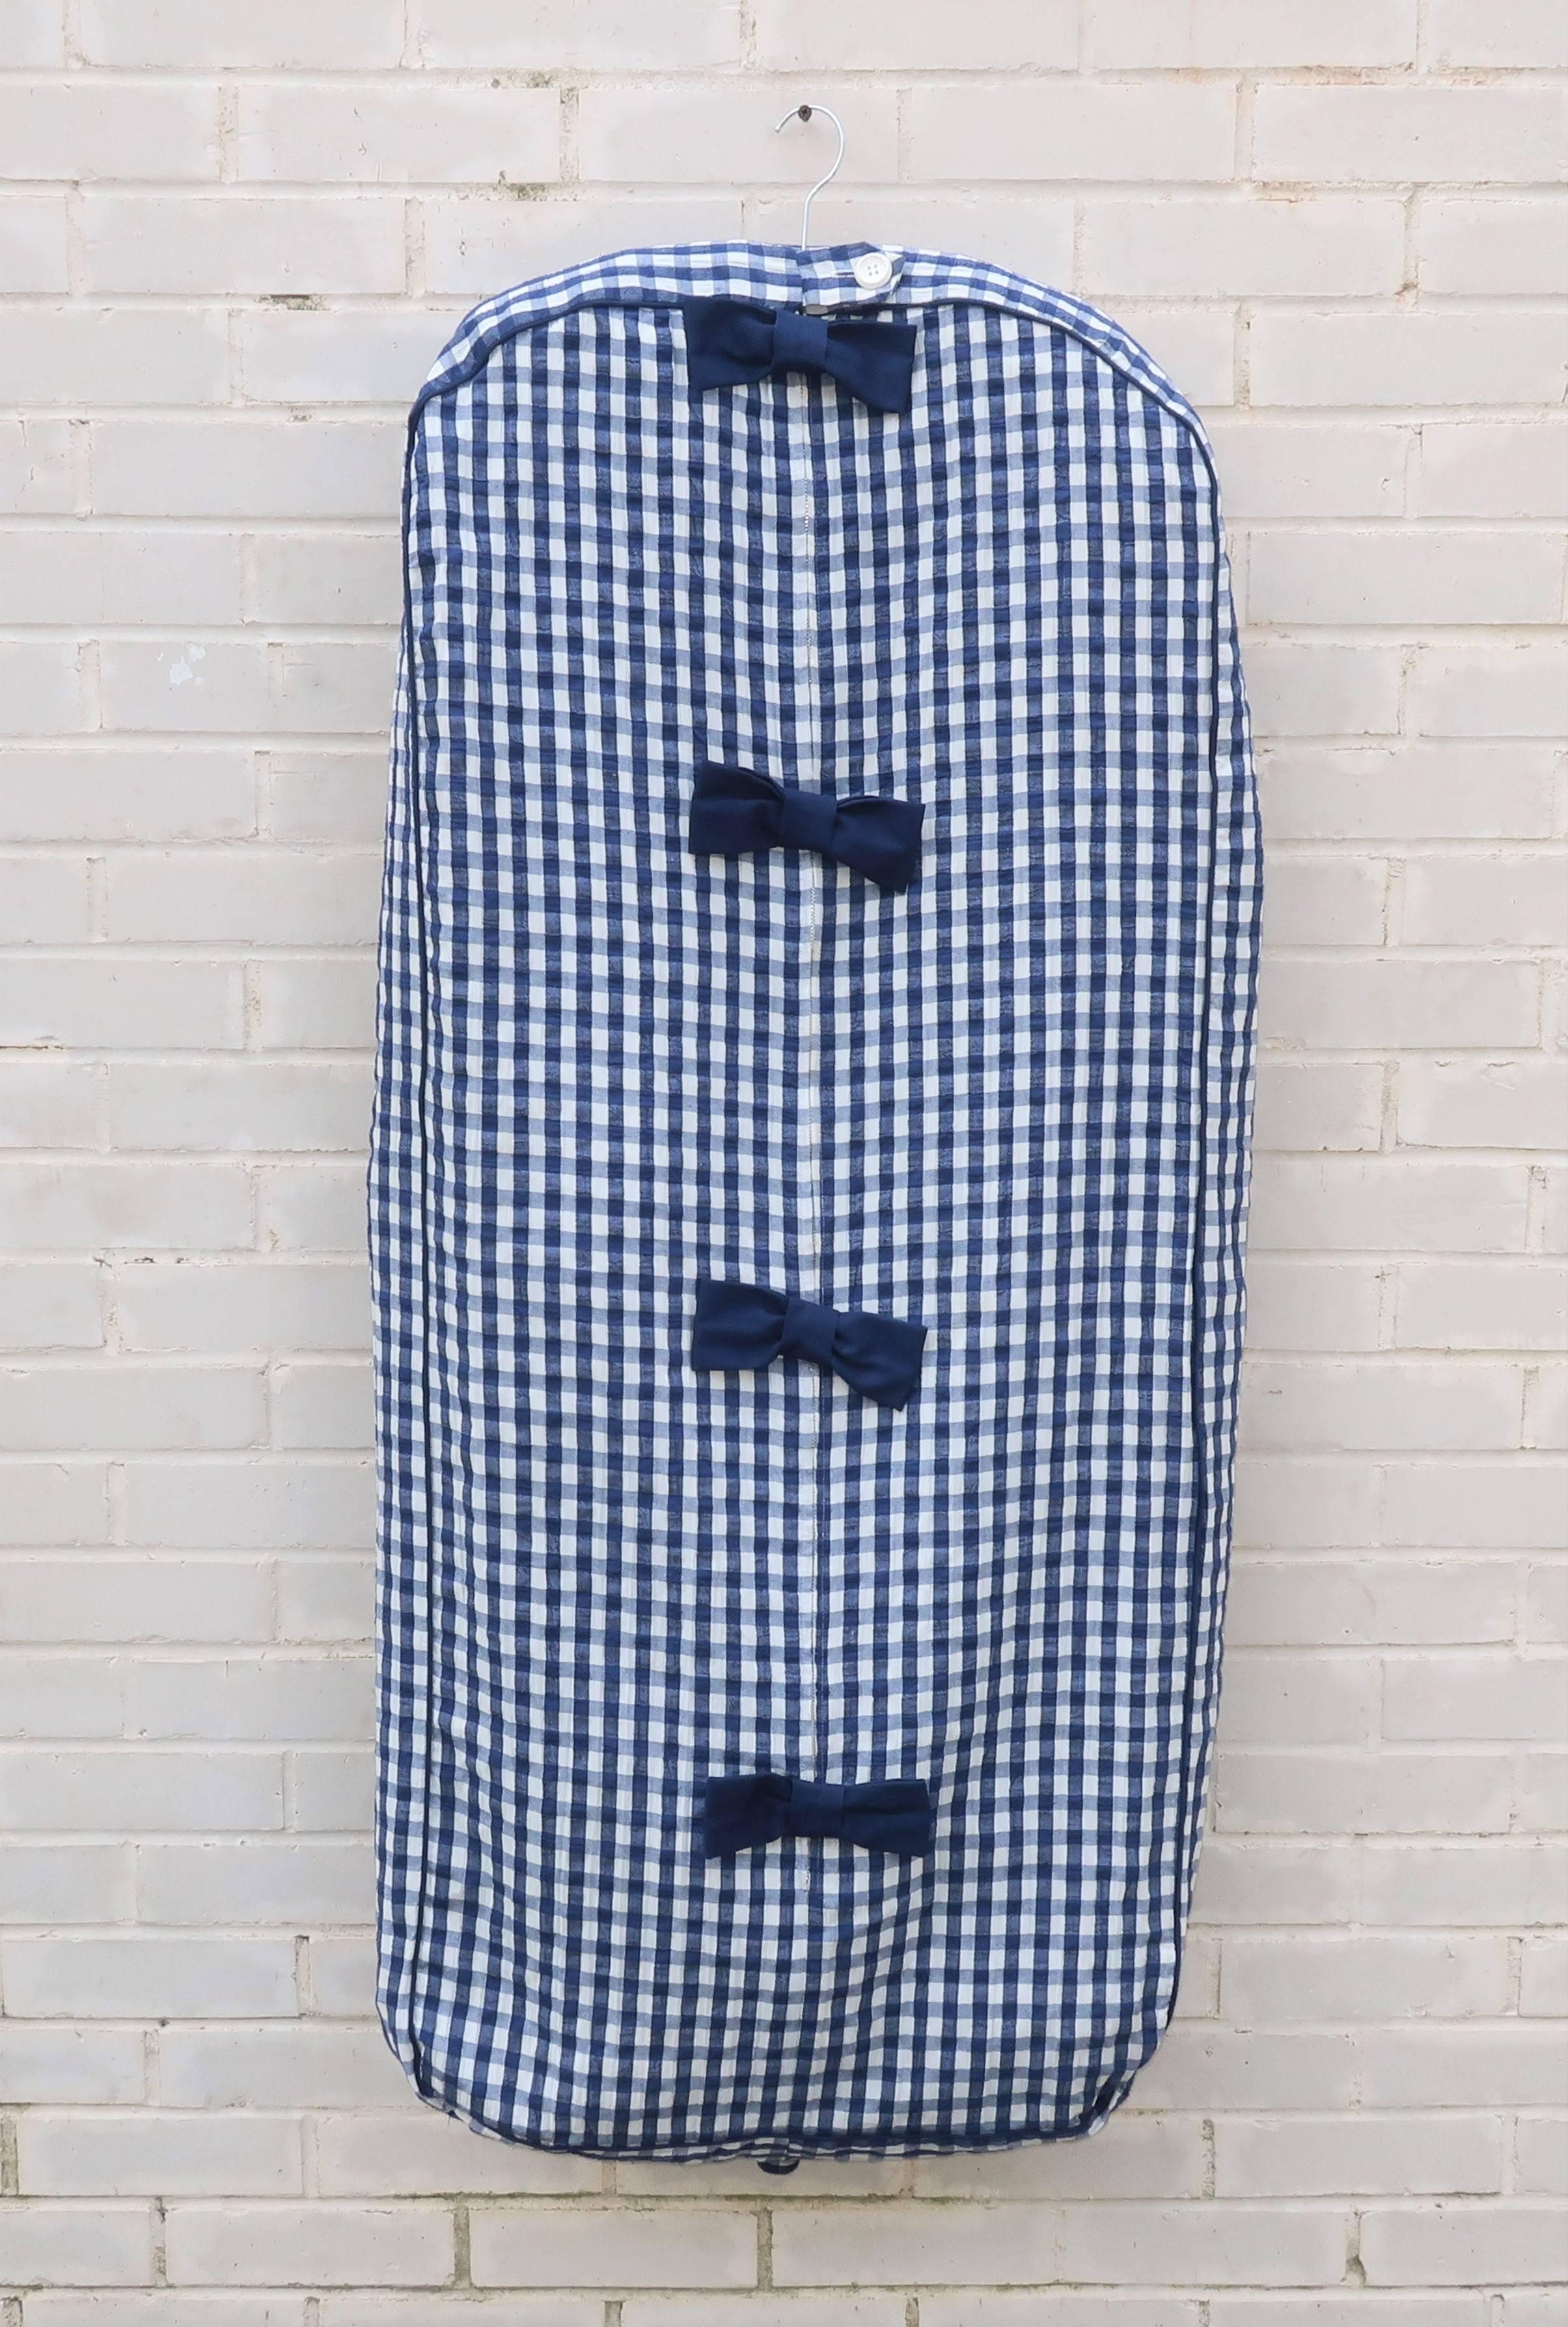 Looking for a weekender?  This 1960's Tannerway garment bag is the perfect preppy alternative to modern day luggage.  The breathable and, oh so adorable, blue and white gingham seersucker cotton fabric looks like Summer and can easily tote a handful